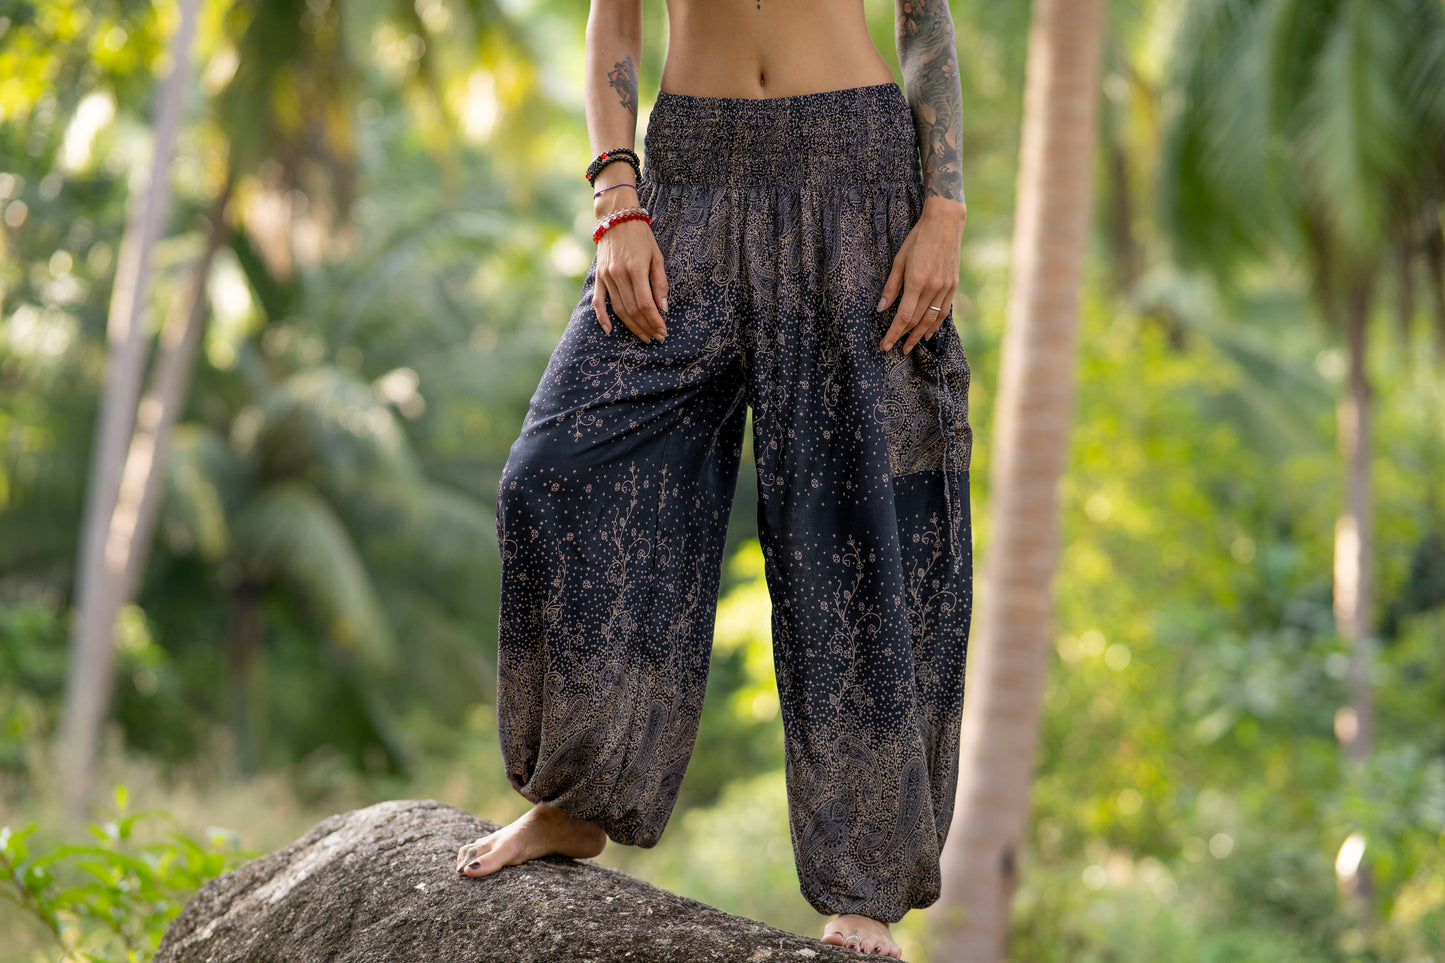 Airy harem pants with a floral pattern in black with pockets